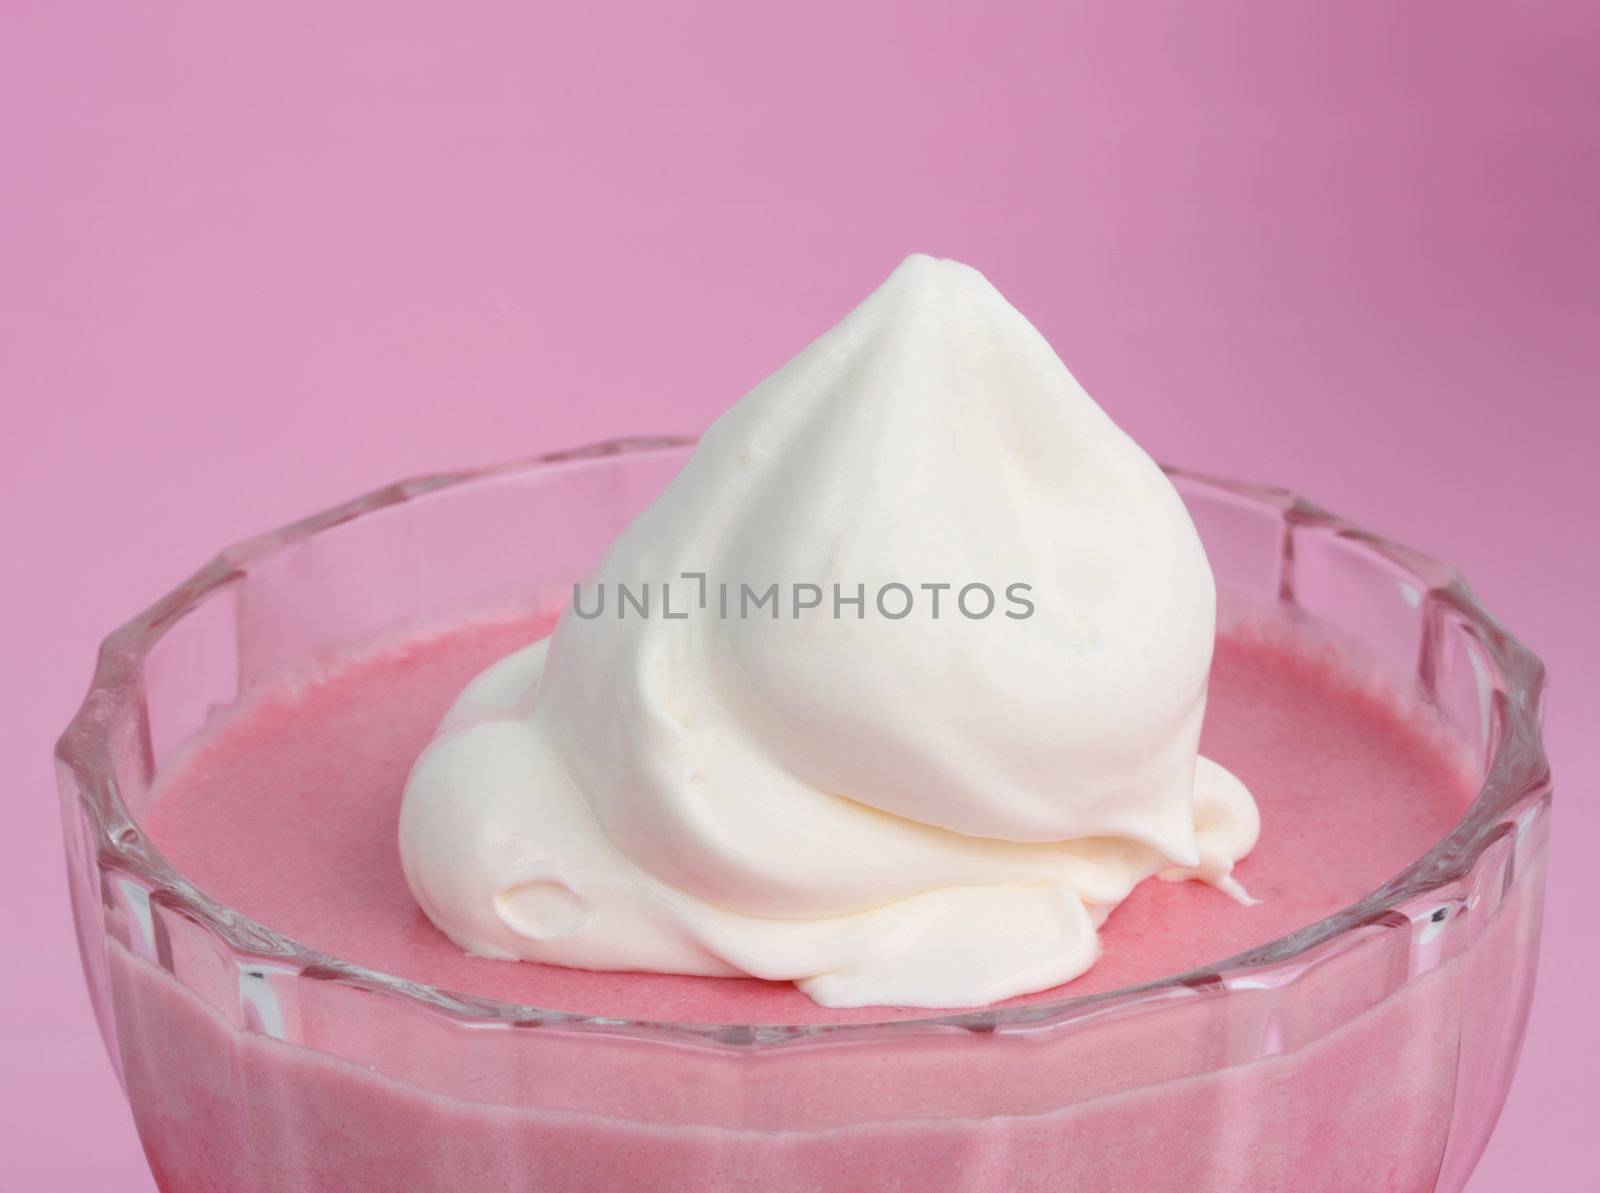 strawberry mousse dessert with cream whip